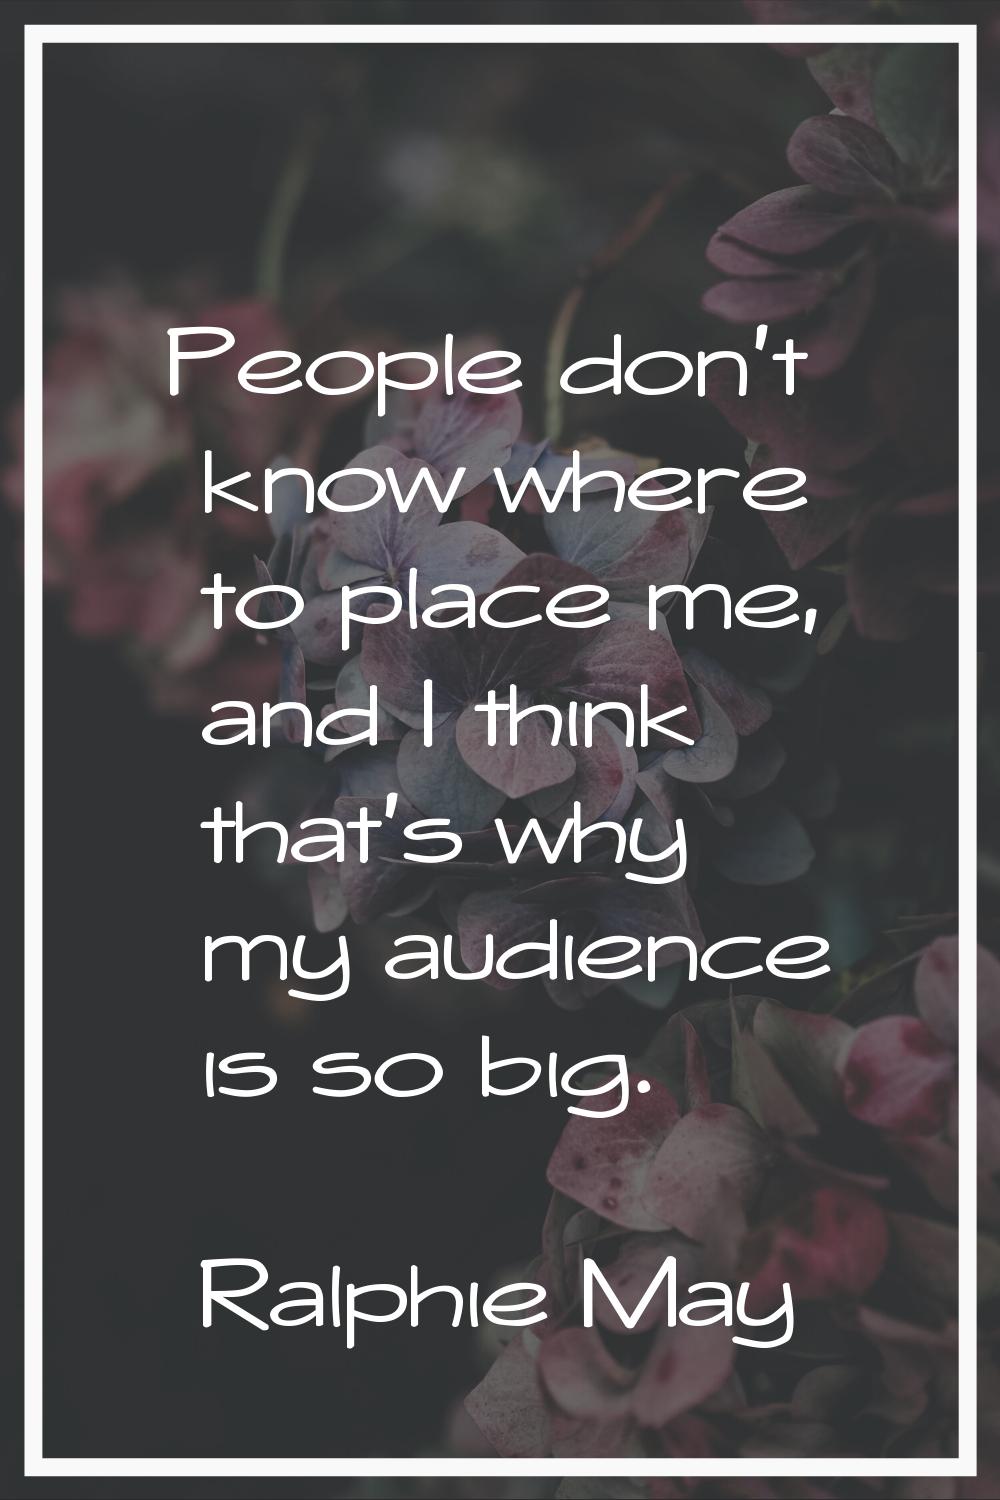 People don't know where to place me, and I think that's why my audience is so big.